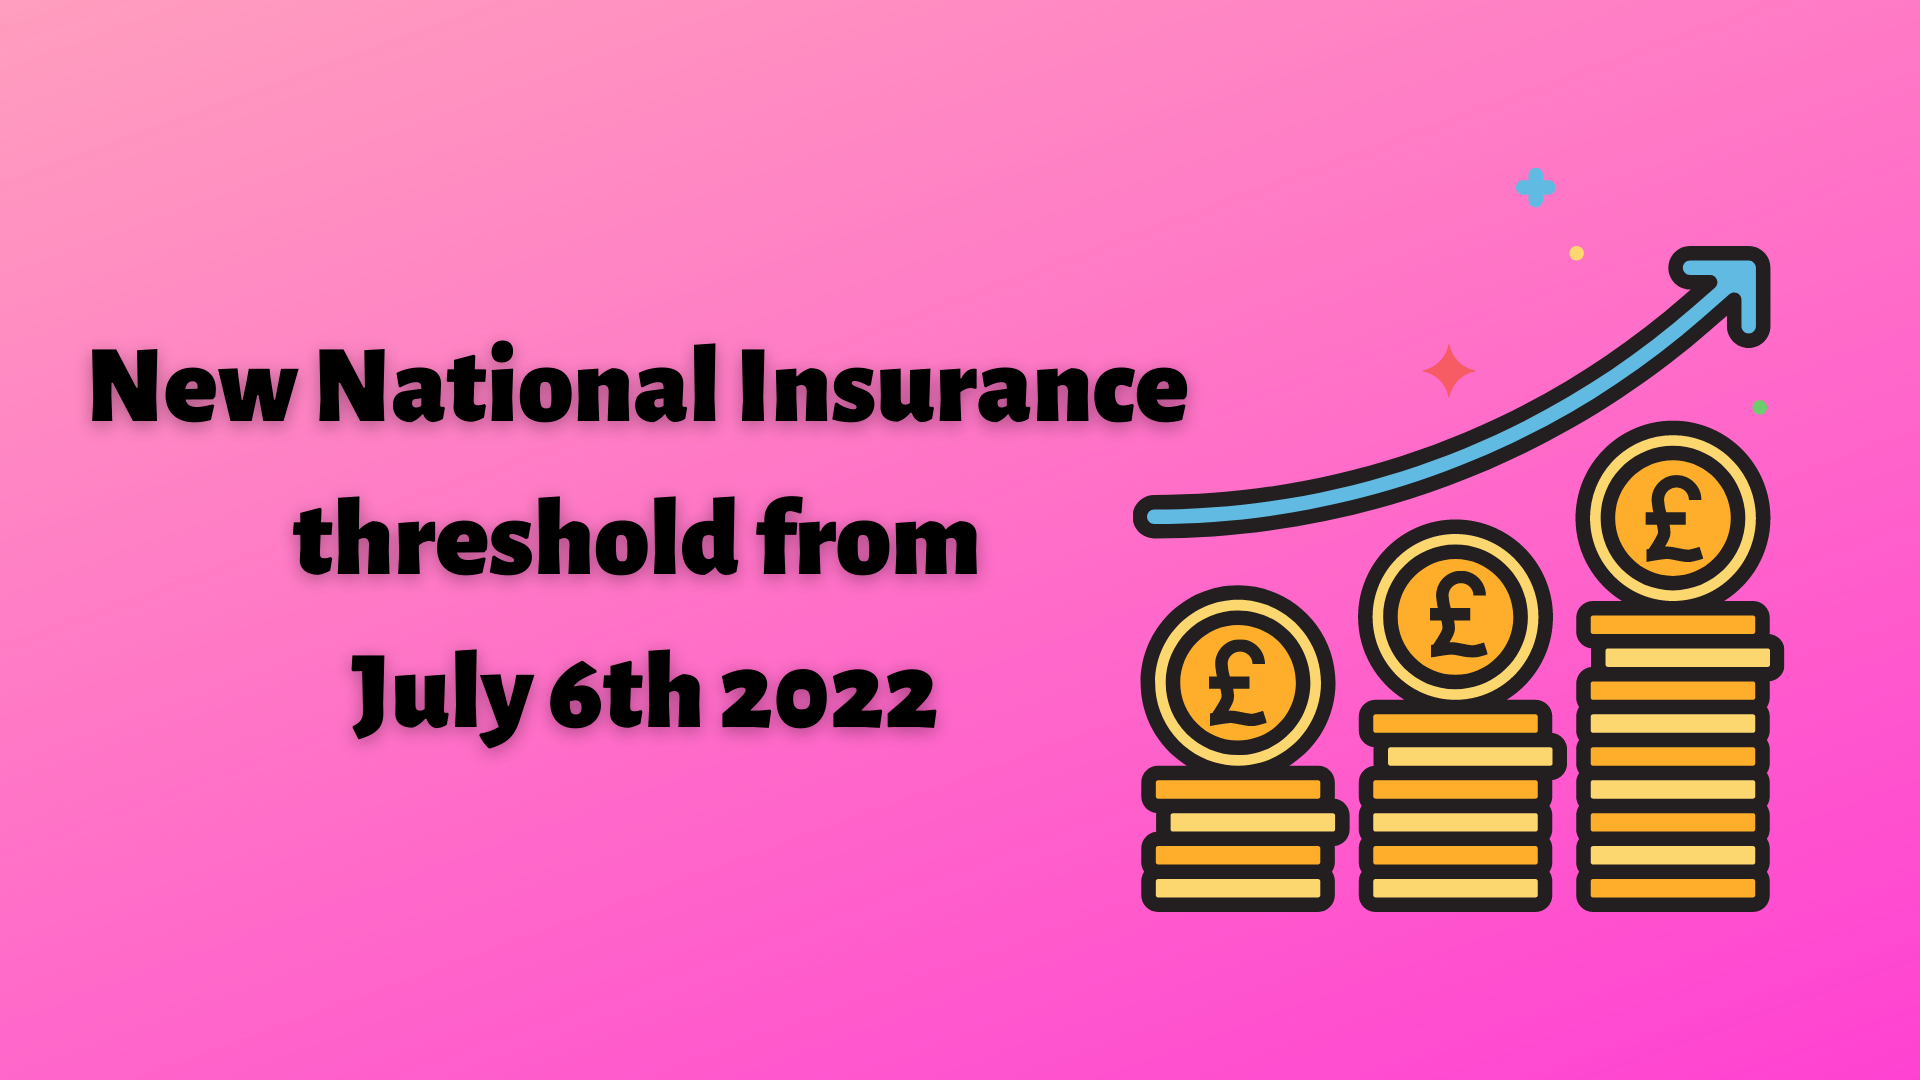 New National Insurance threshold comes into effect from 6th July 2022